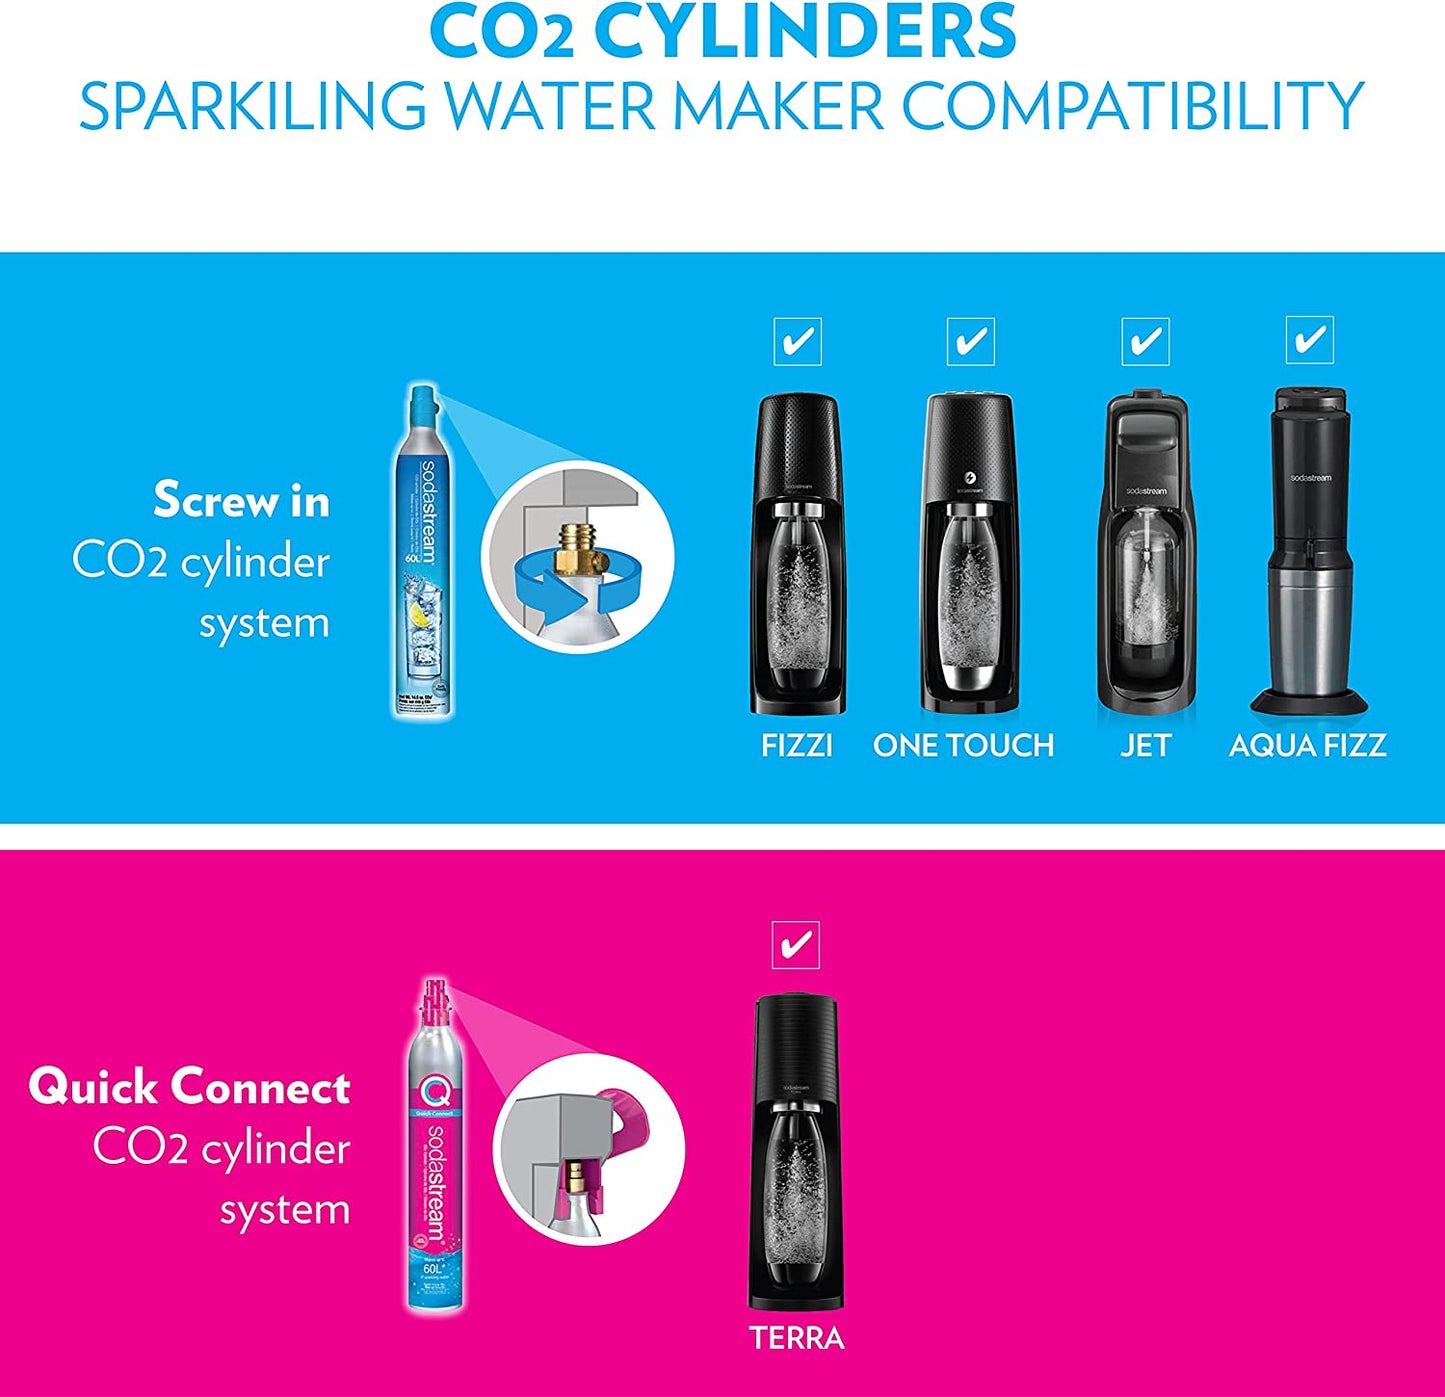 SodaStream Terra Sparkling Water Maker (Black) with CO2, DWS Bottle and Bubly Drop